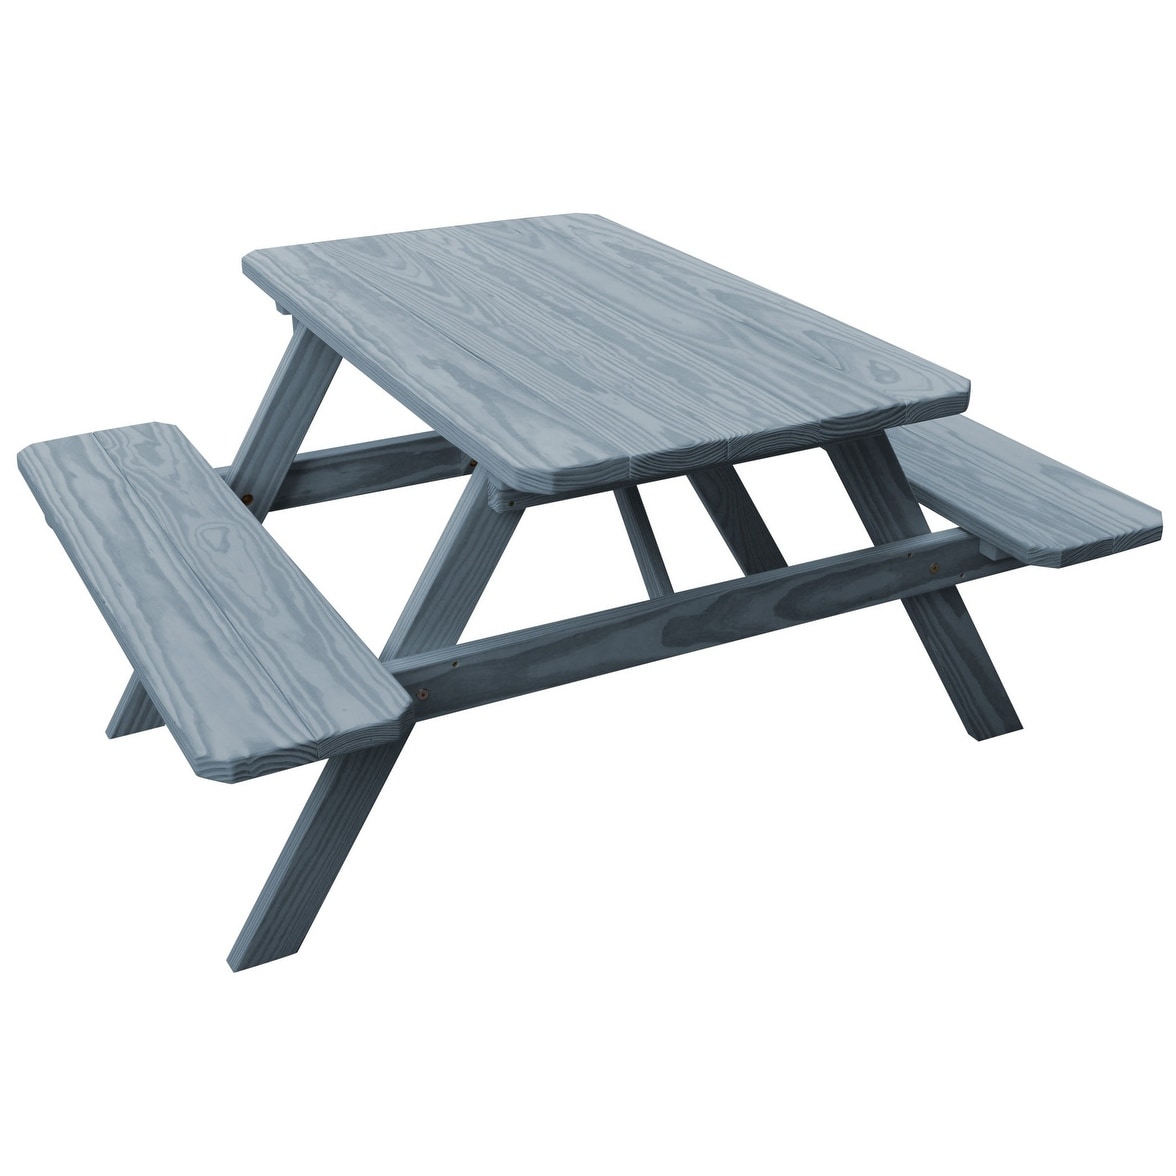 Pine 4 Picnic Table With Attached Benches